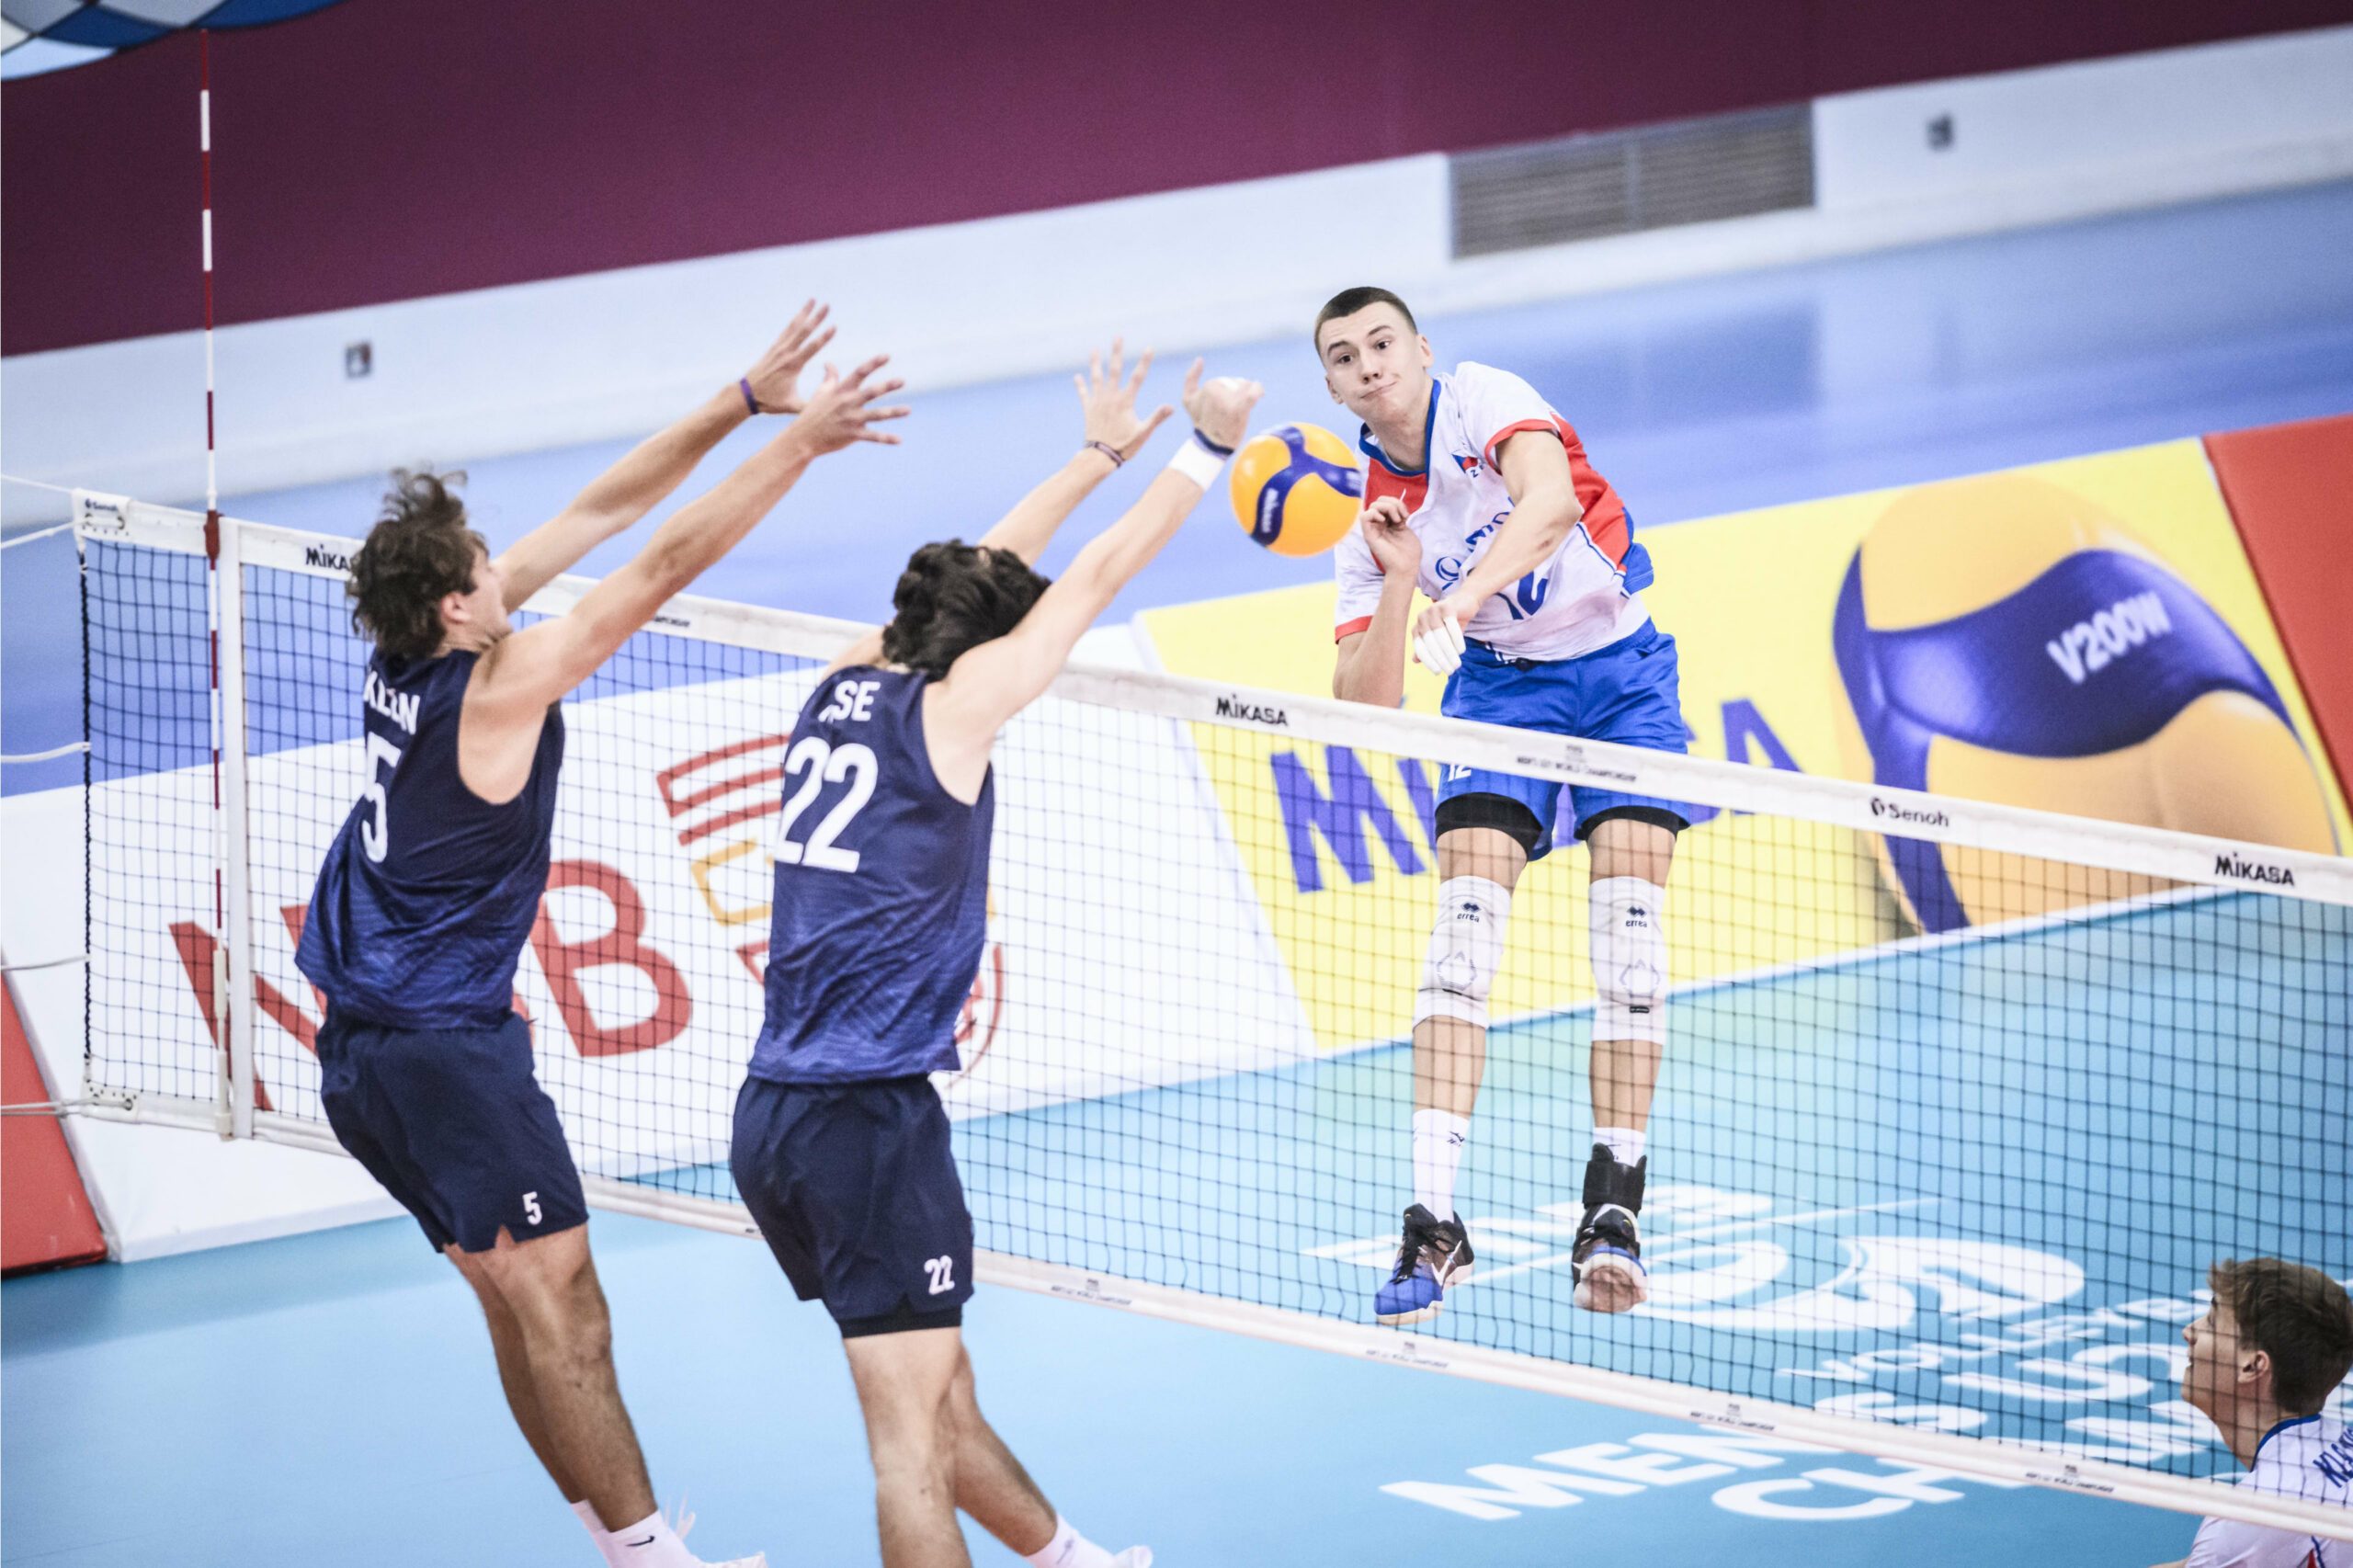 Owen Rose with a block against Czechia.